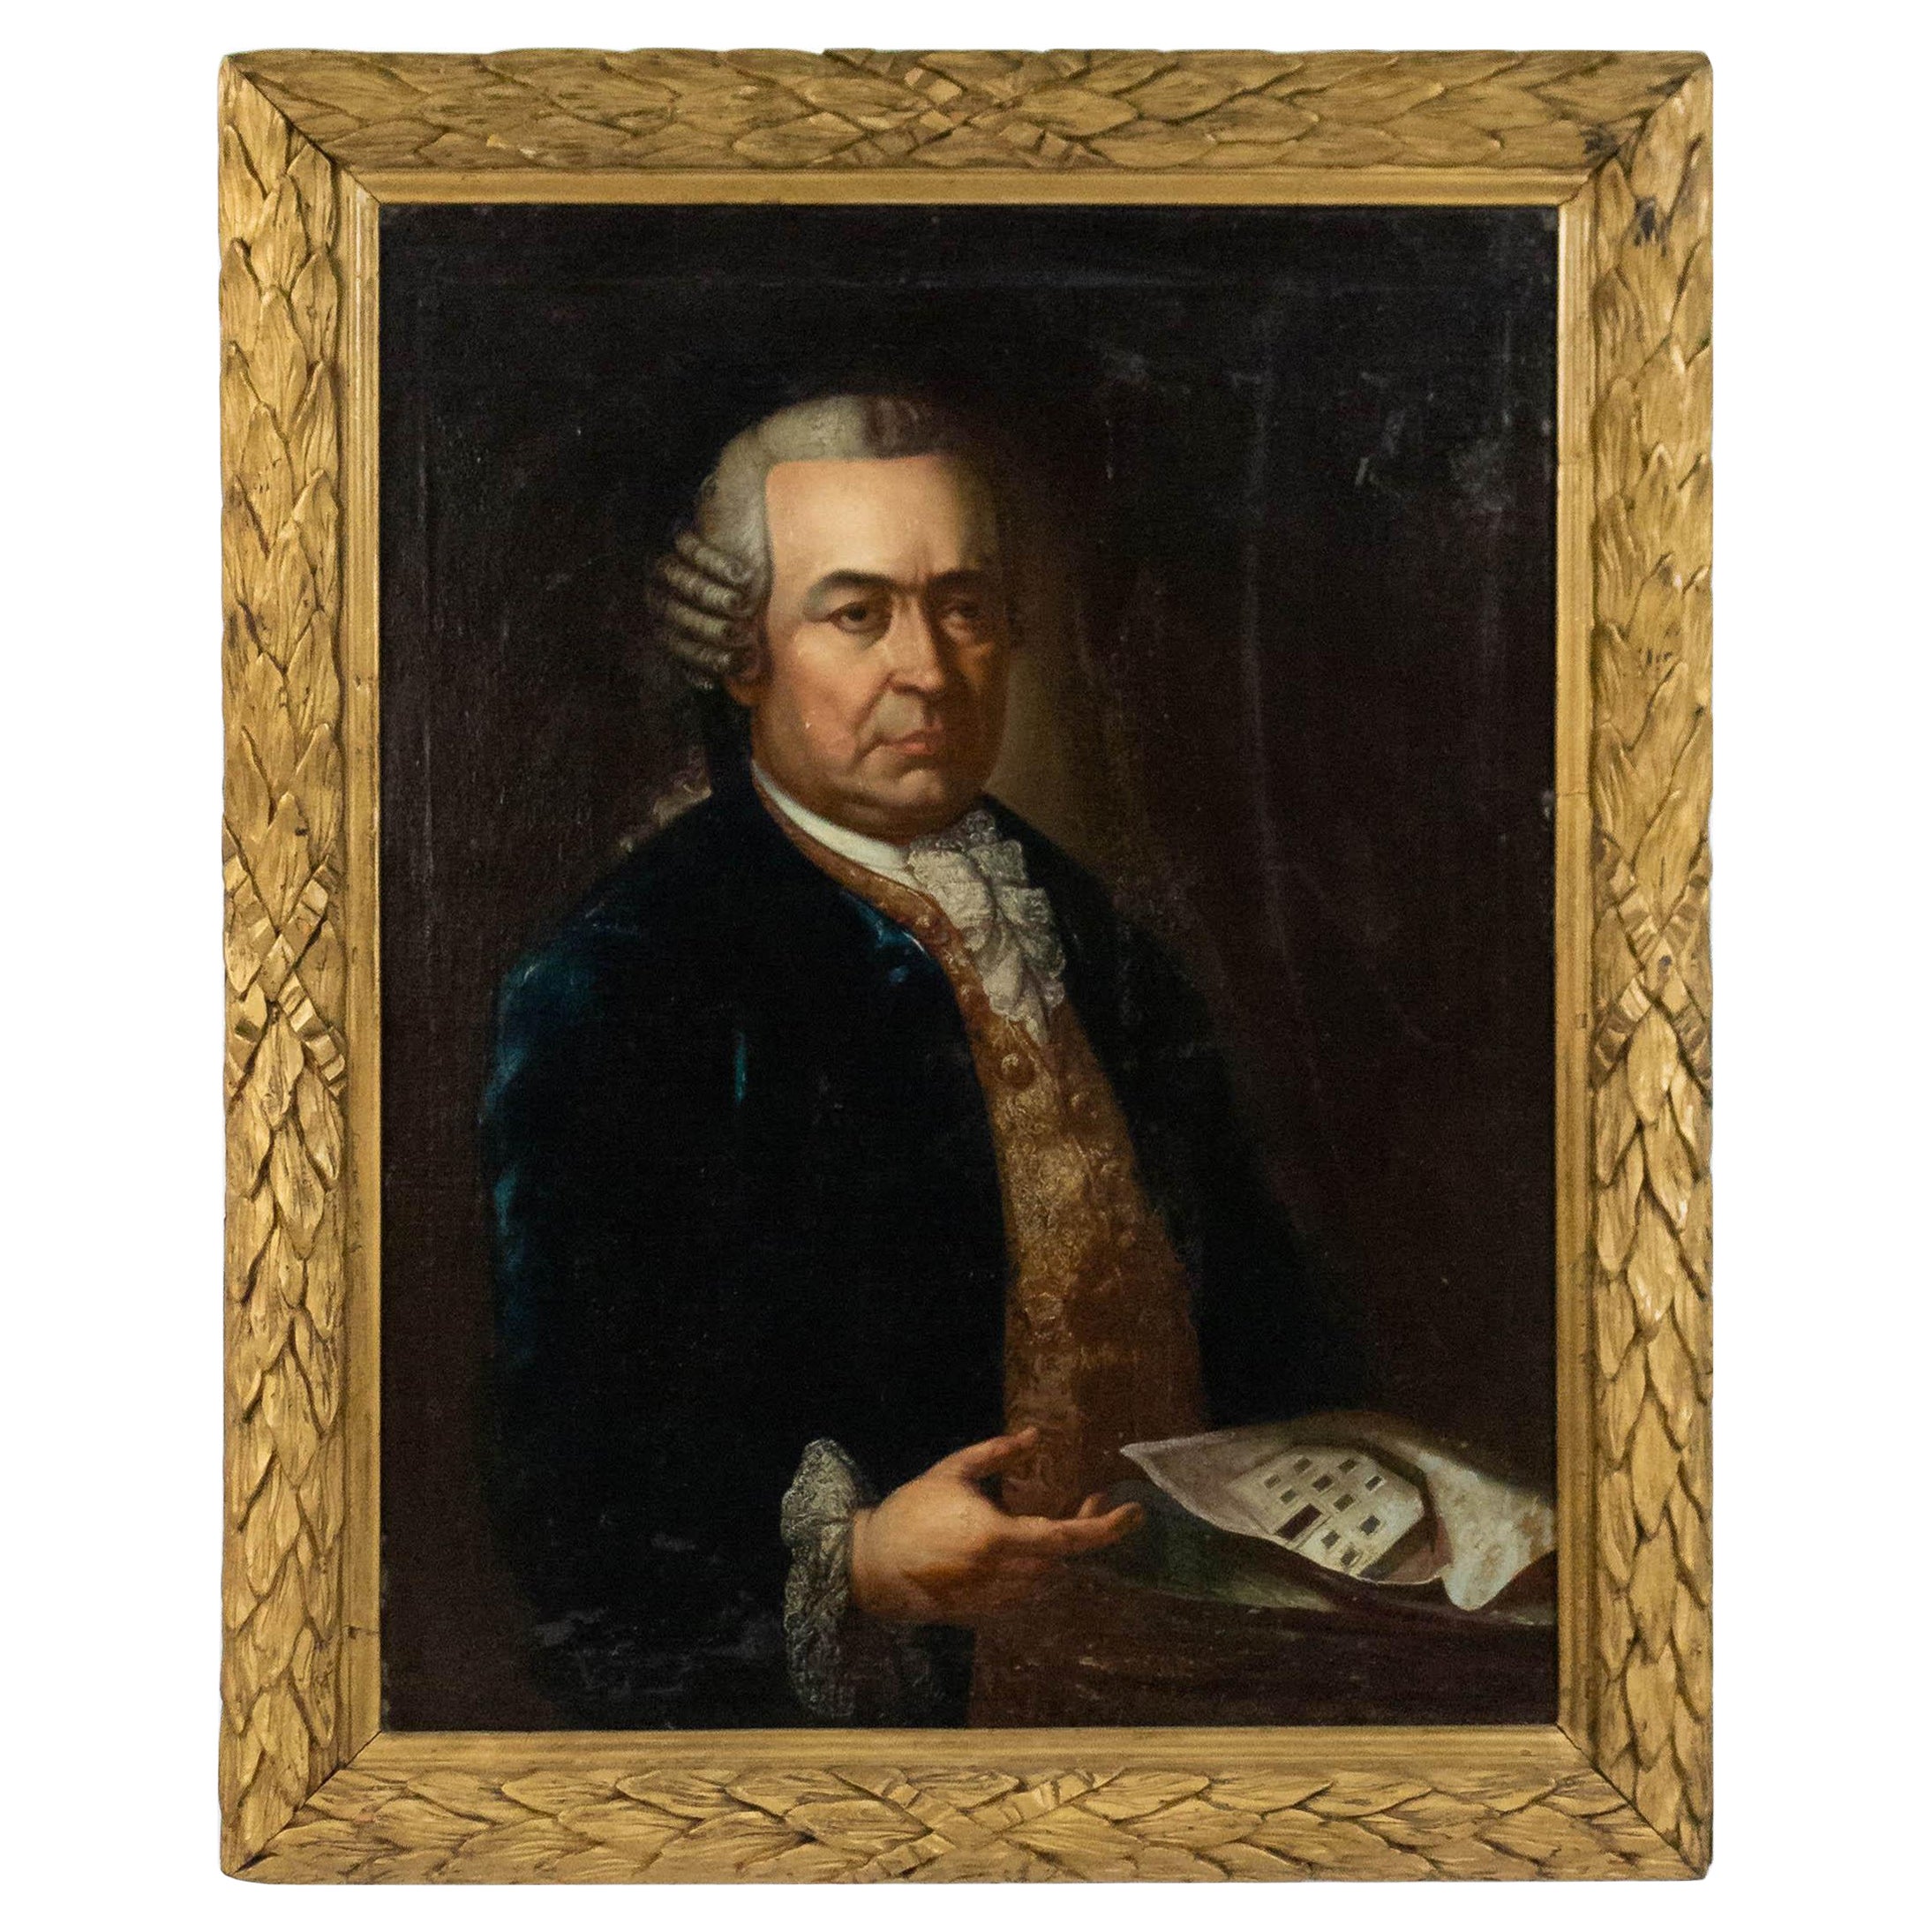 19th Century American Oil Portrait of a Man in a Blue Coat Framed For Sale